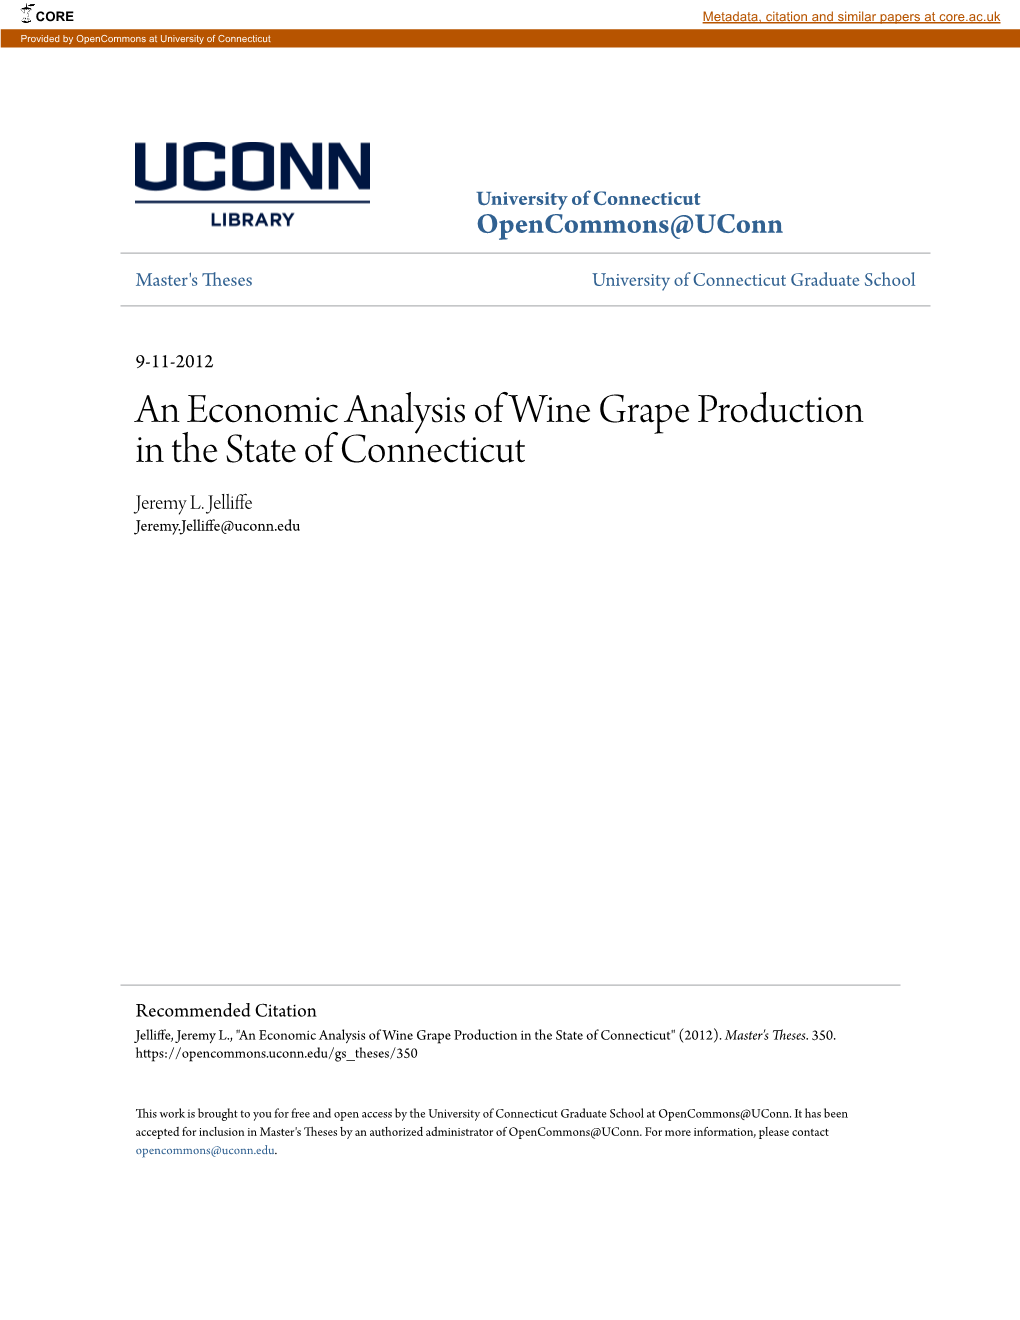 An Economic Analysis of Wine Grape Production in the State of Connecticut Jeremy L